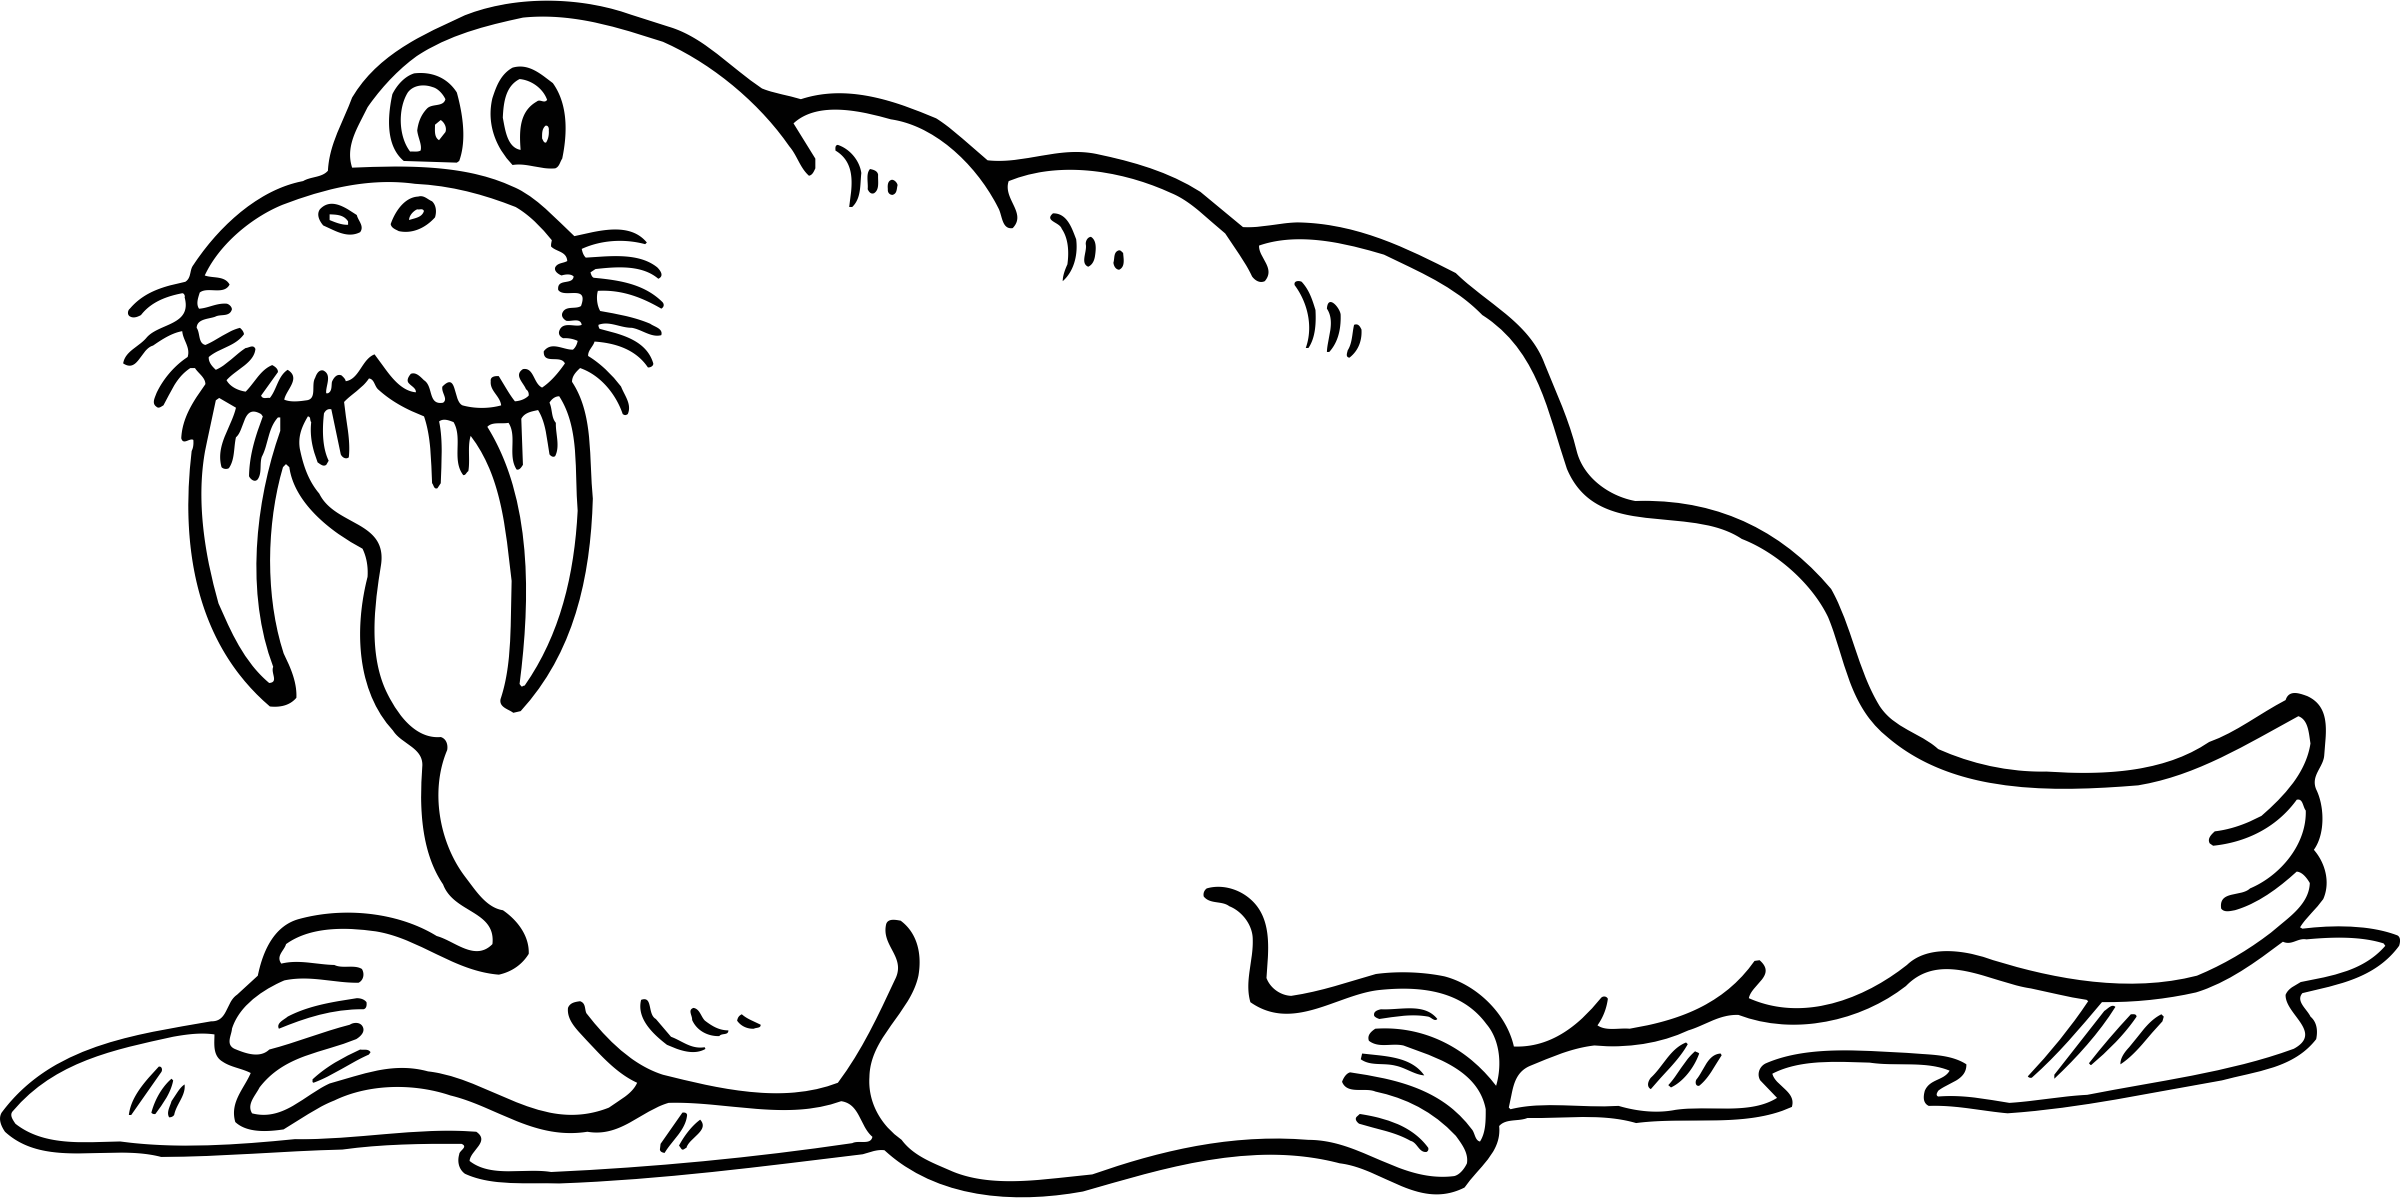 Black and white crazywidow. Walrus clipart baby